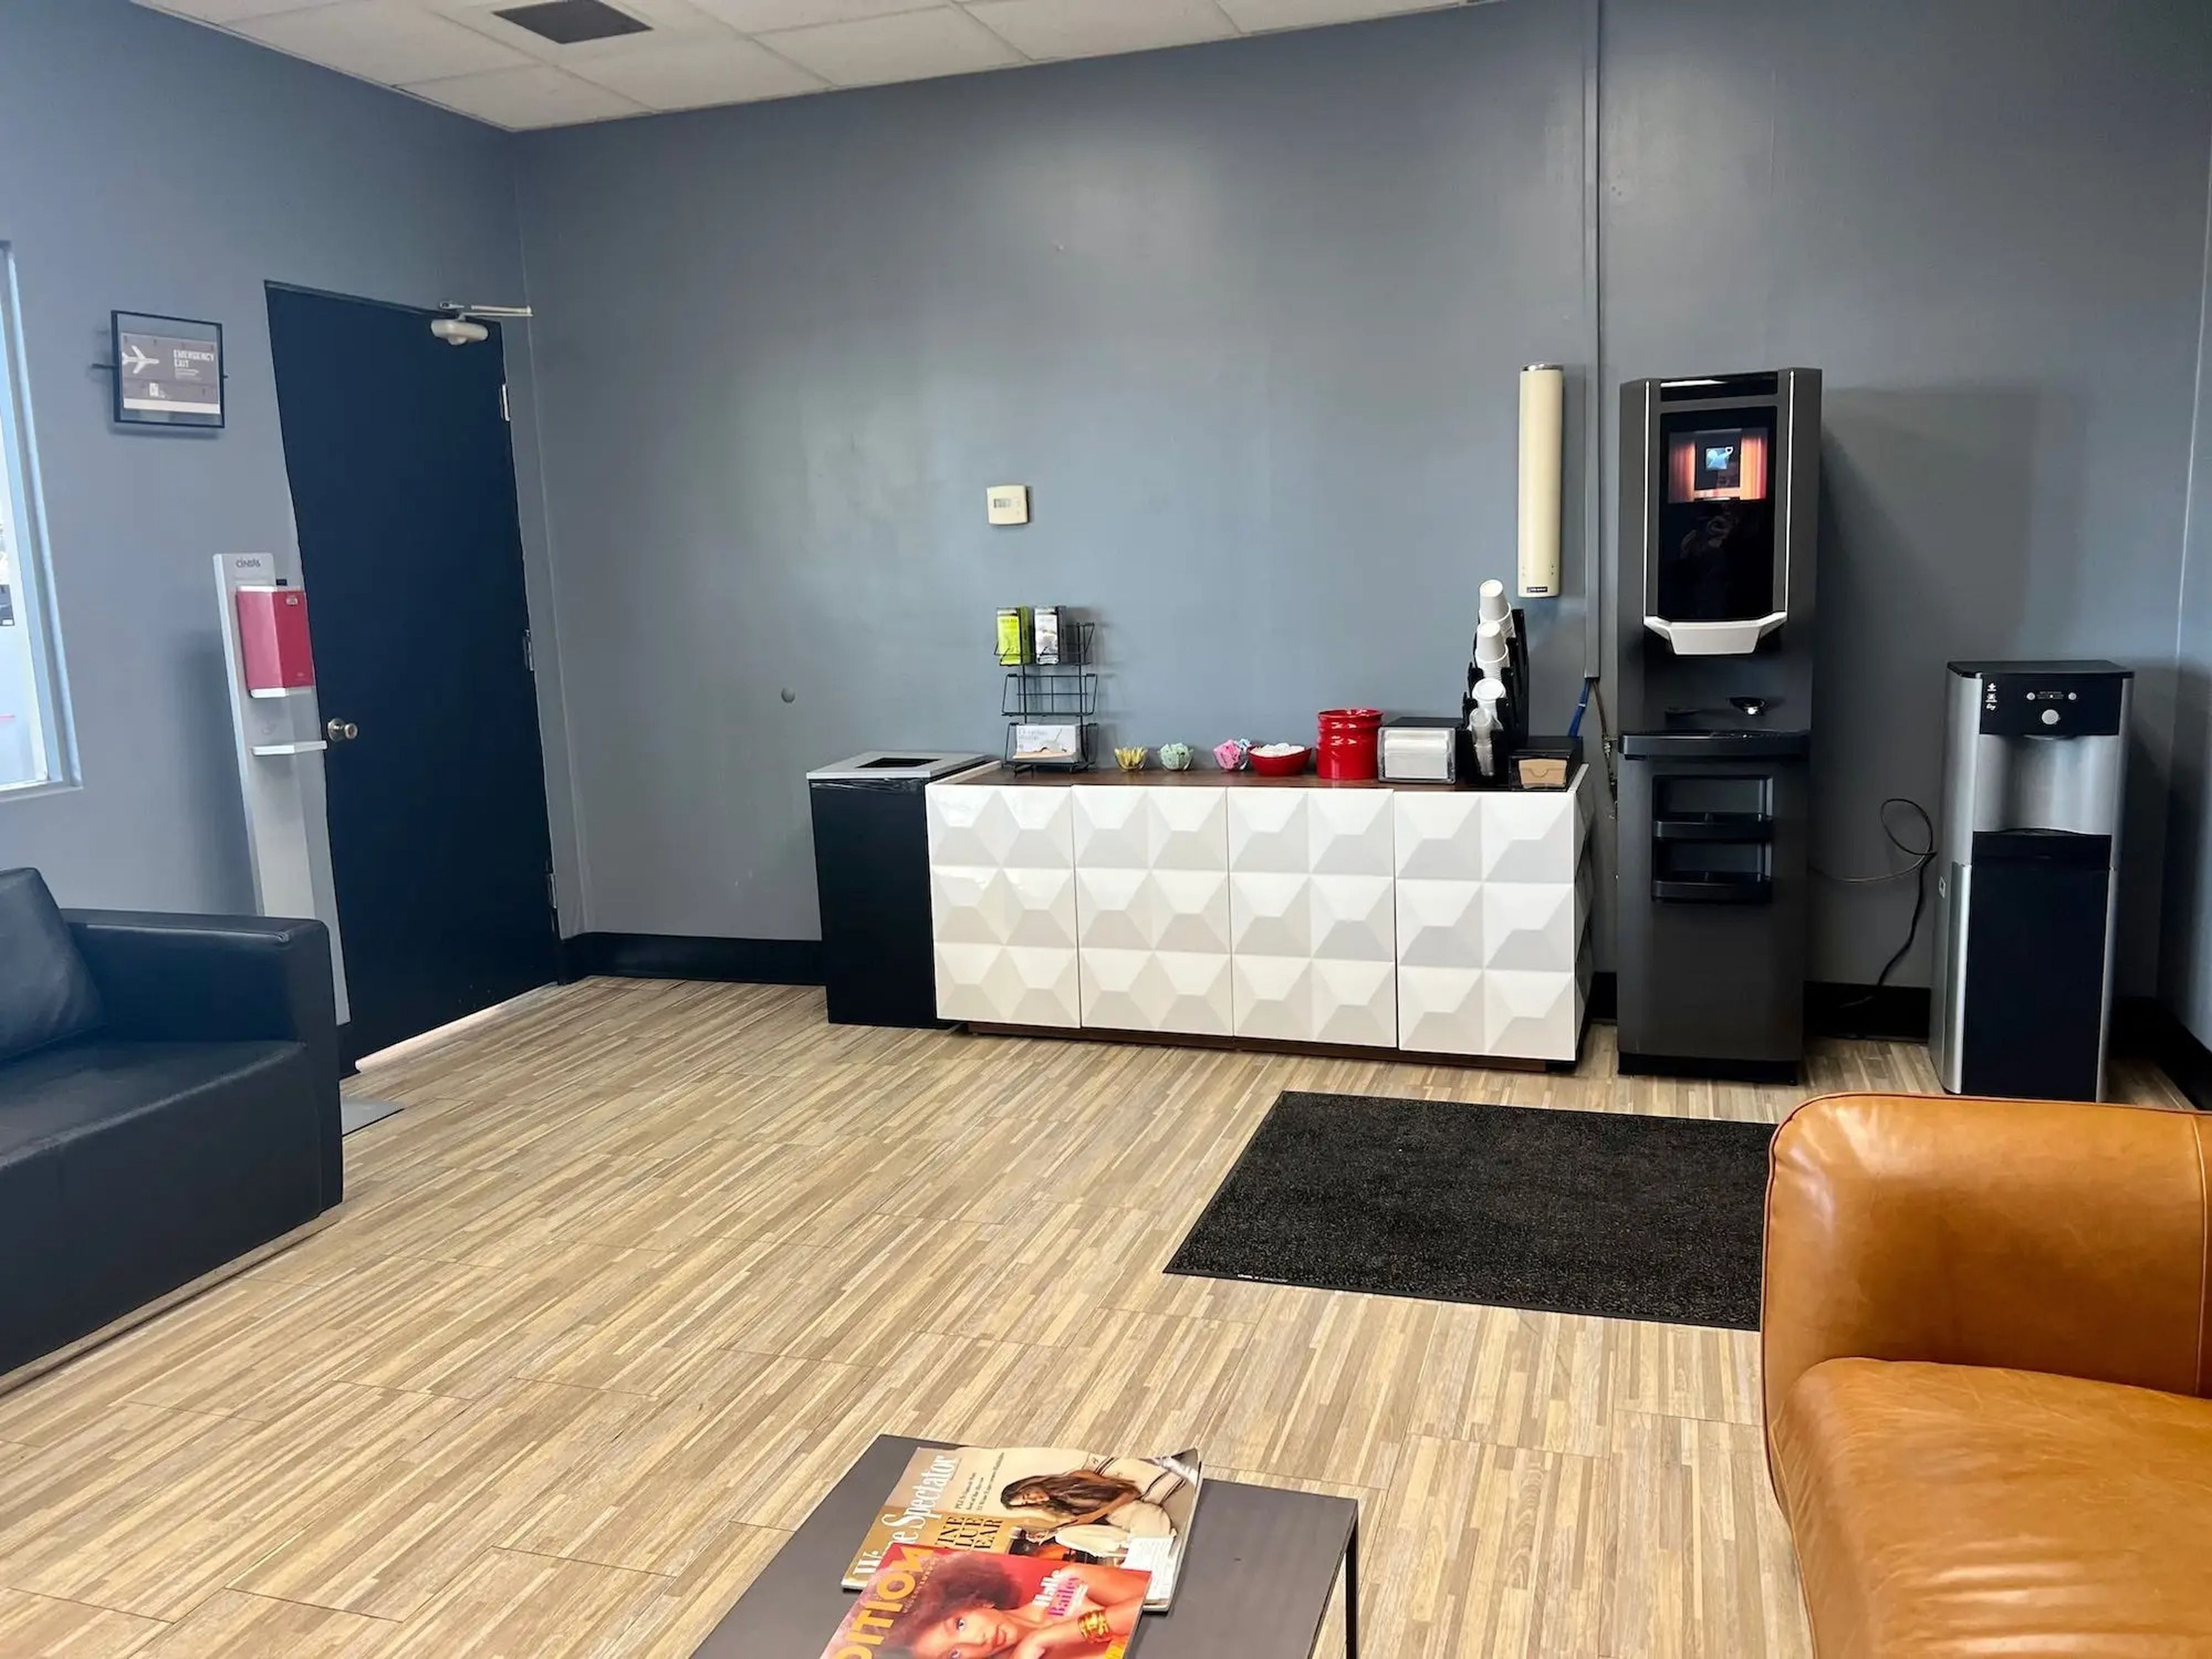 A view of the indoor lounge in JSX's private terminal with a coffee maker and two couches.